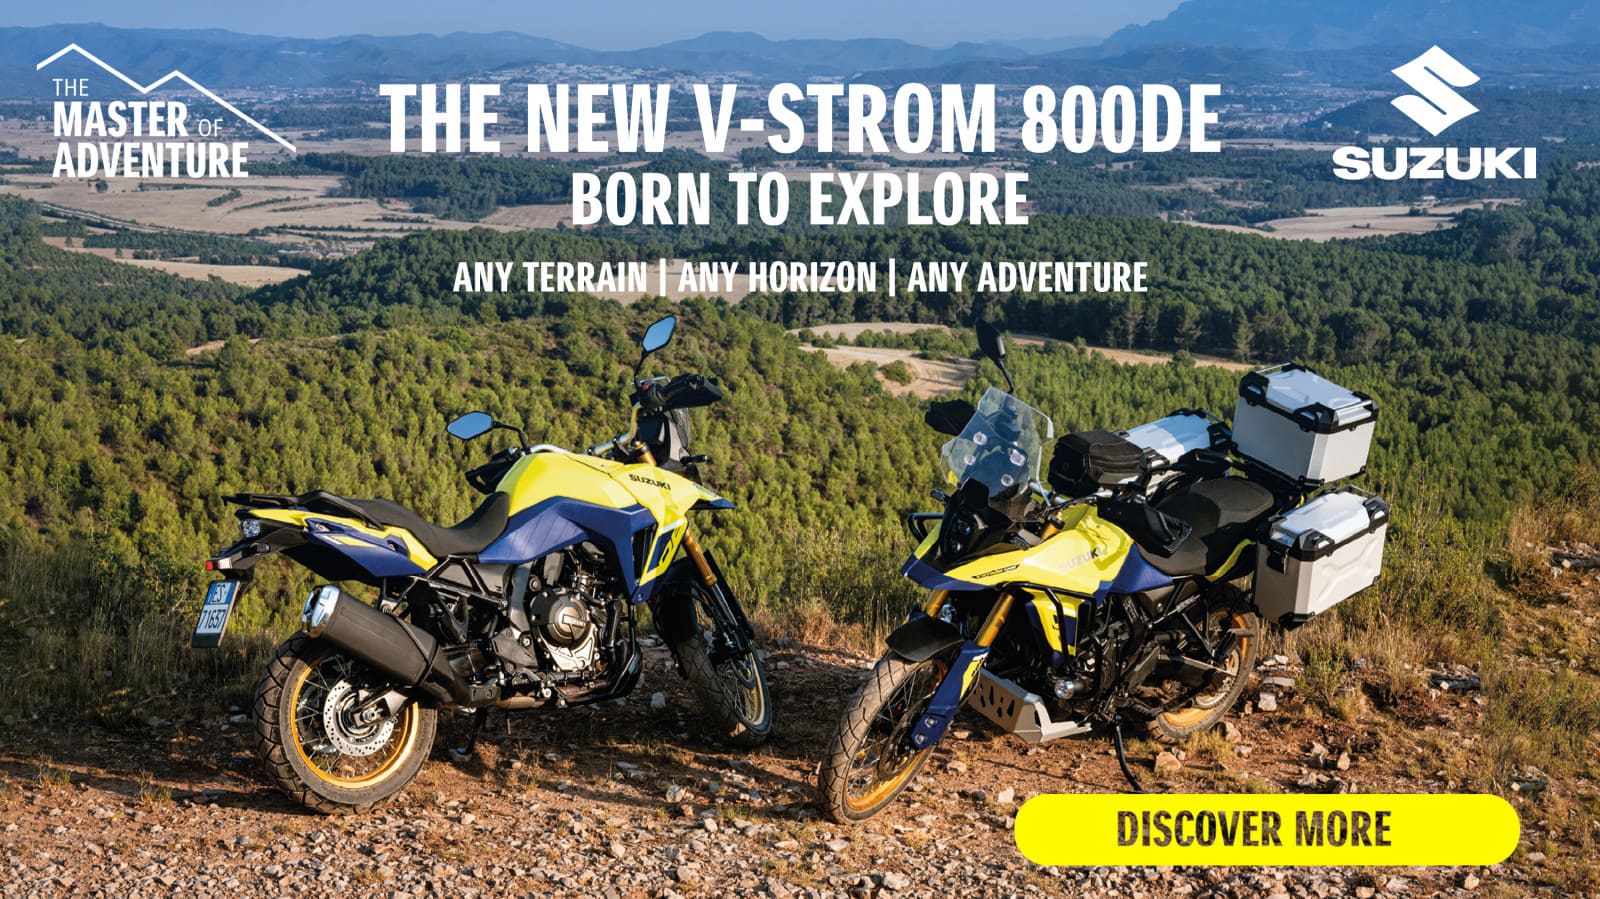 The all-new Suzuki DL800DE V-Strom - Click here to find out more!